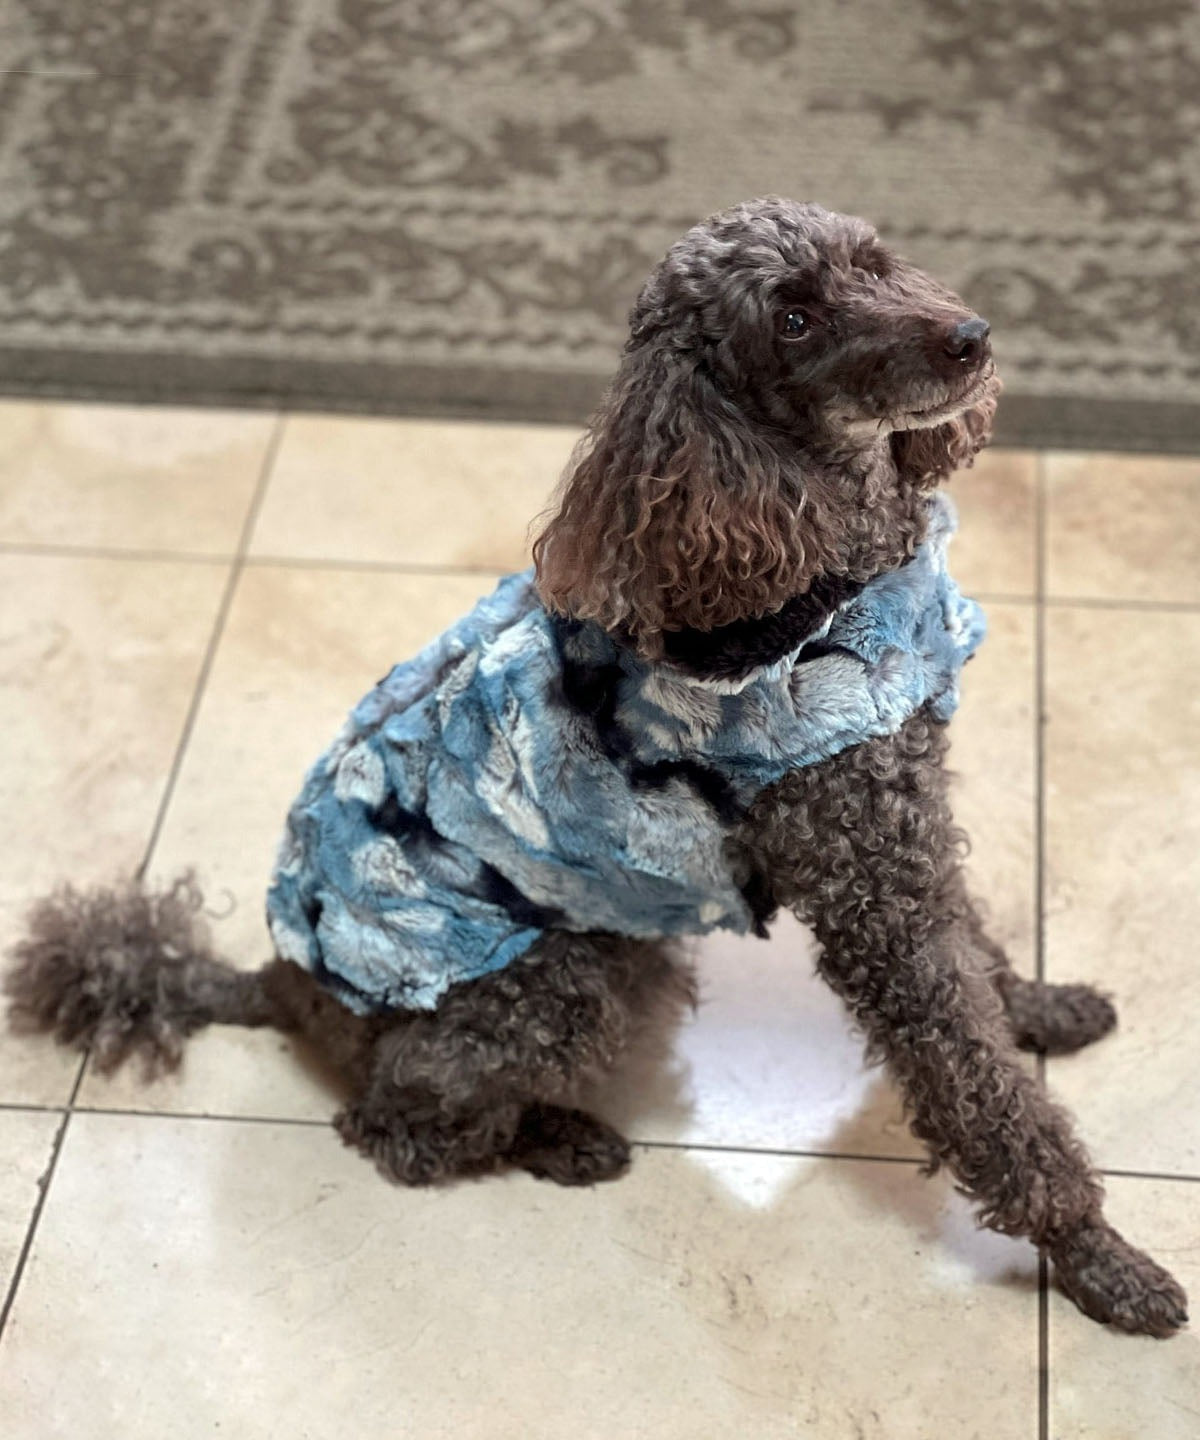 Dog Coat on Poodle | Rainier Sky Luxury Faux Fur with Espresso Bean | Handmade in the USA by Pandemonium Seattle